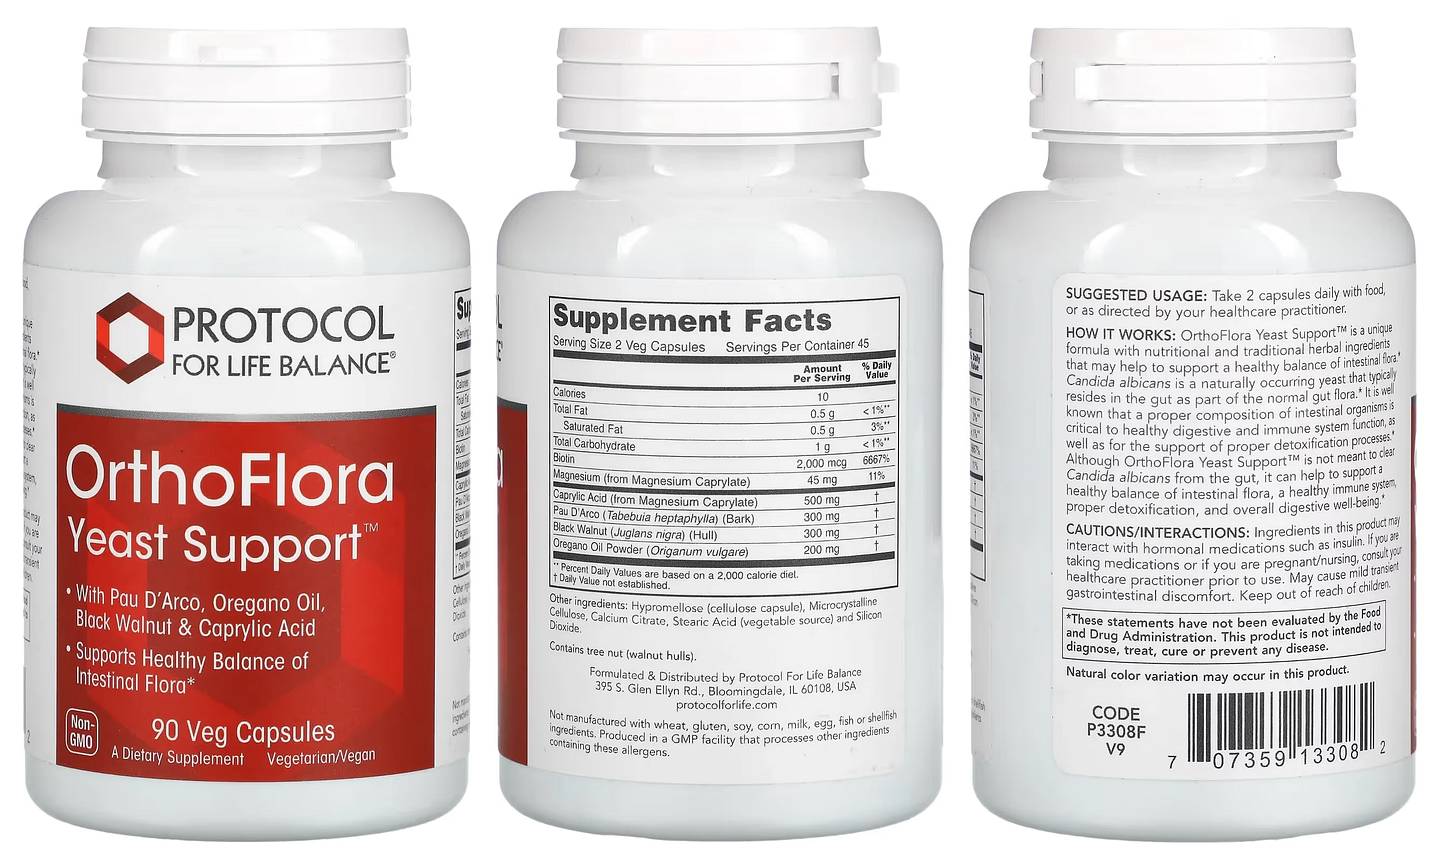 Protocol for Life Balance, OrthoFlora Yeast Support packaging